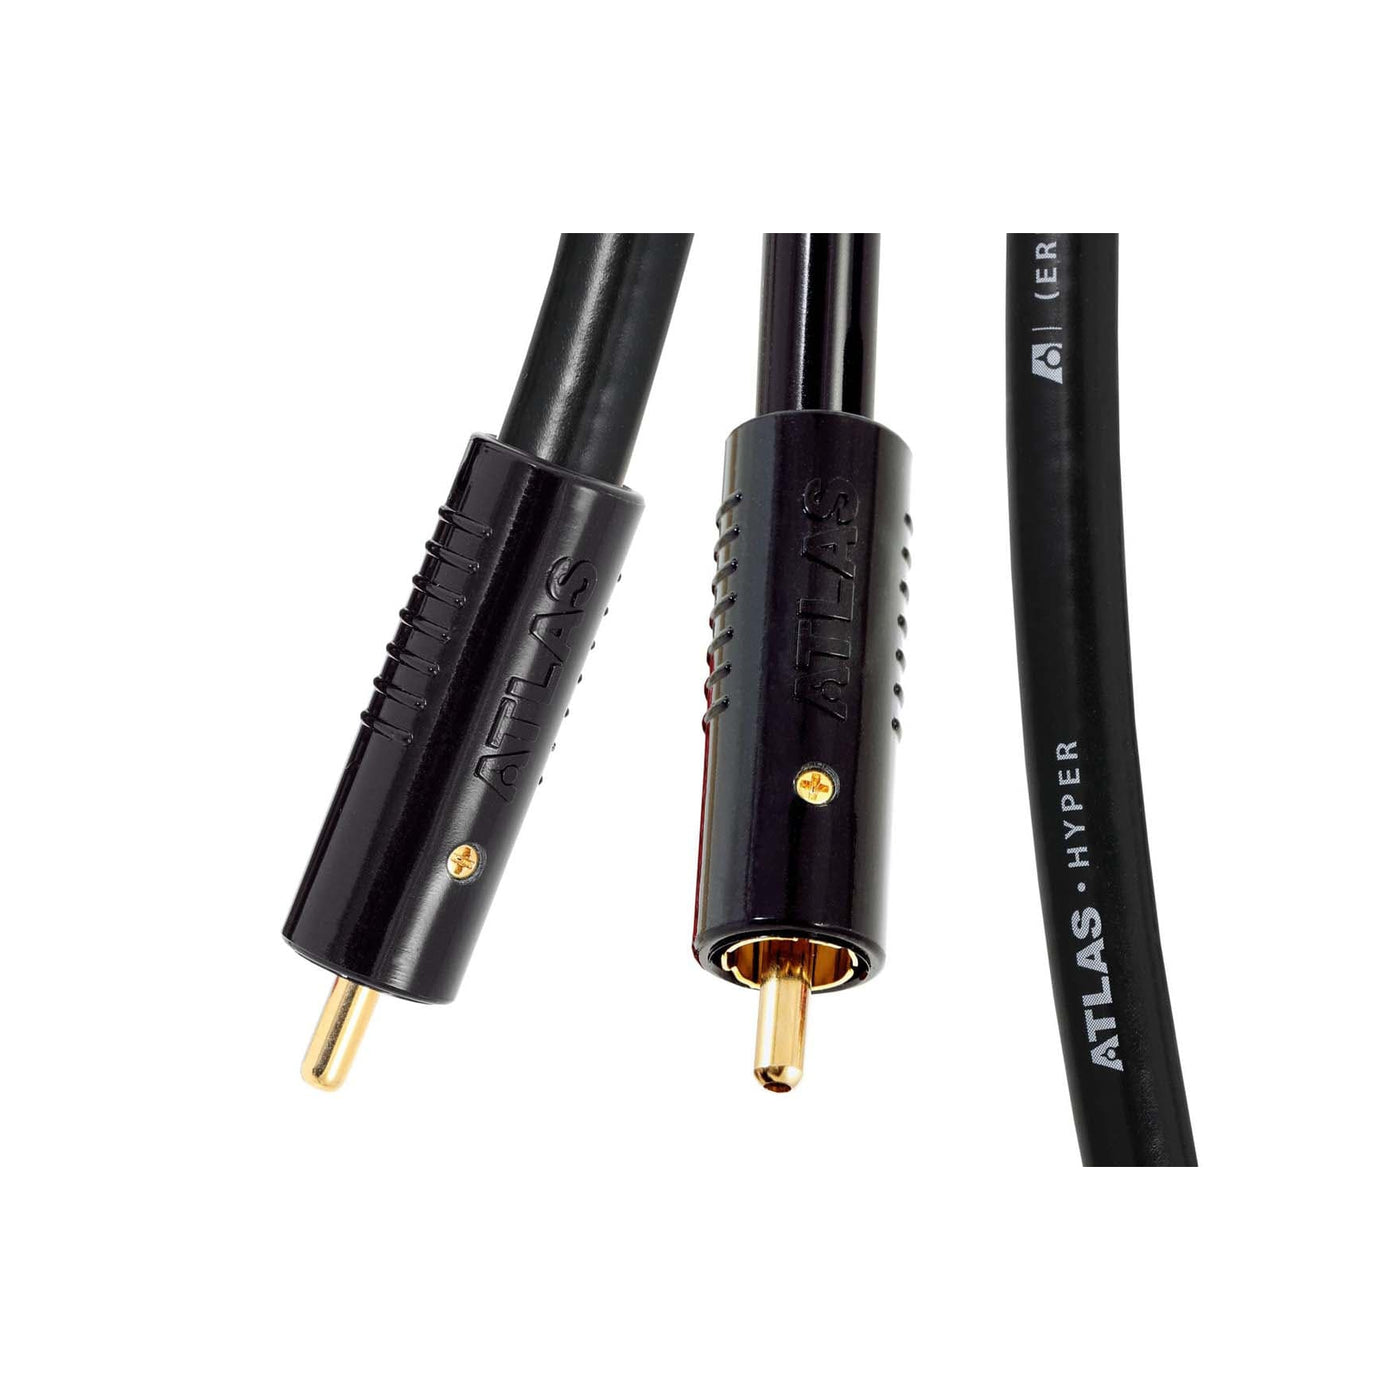 Atlas Hyper Achromatic Subwoofer RCA Cable at Audio Influence